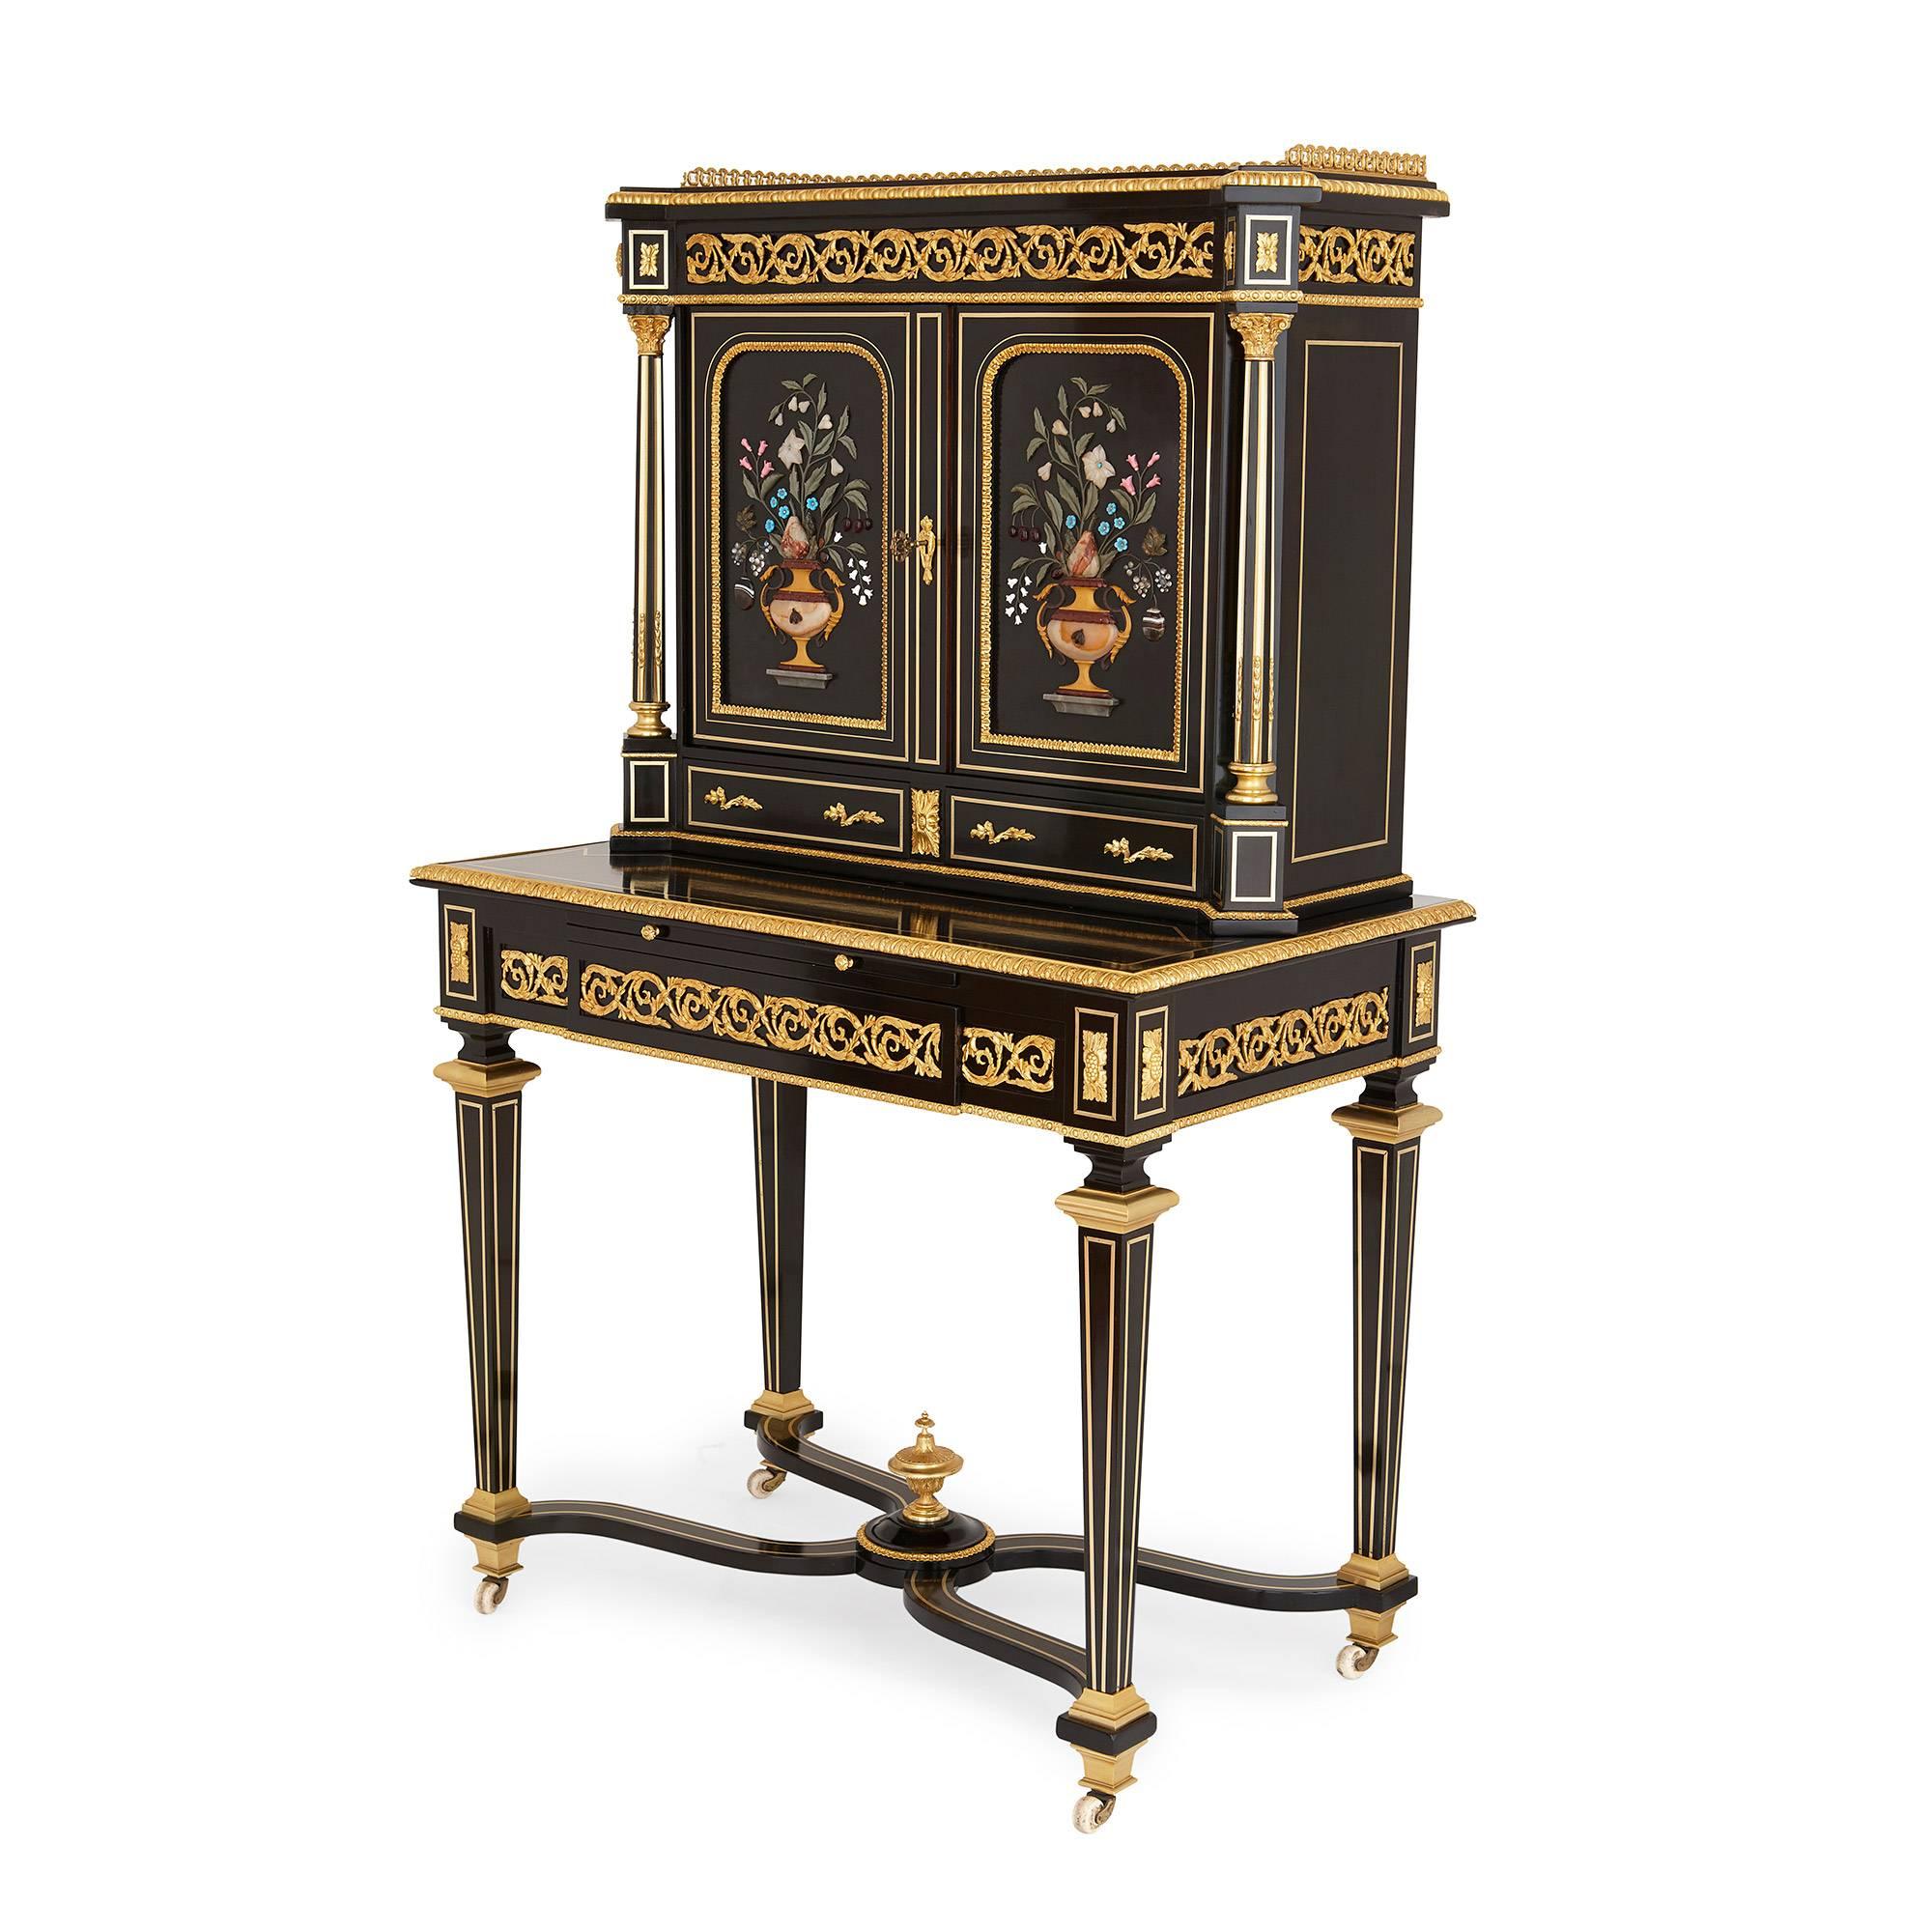 The upper section of the bonheur du jour with doors mounted with hardstone vases of fruit and flowers, opening to an interior shelf, above two small drawers, the base with a gilt-tooled leather lined writing slide above a long frieze drawer, leading